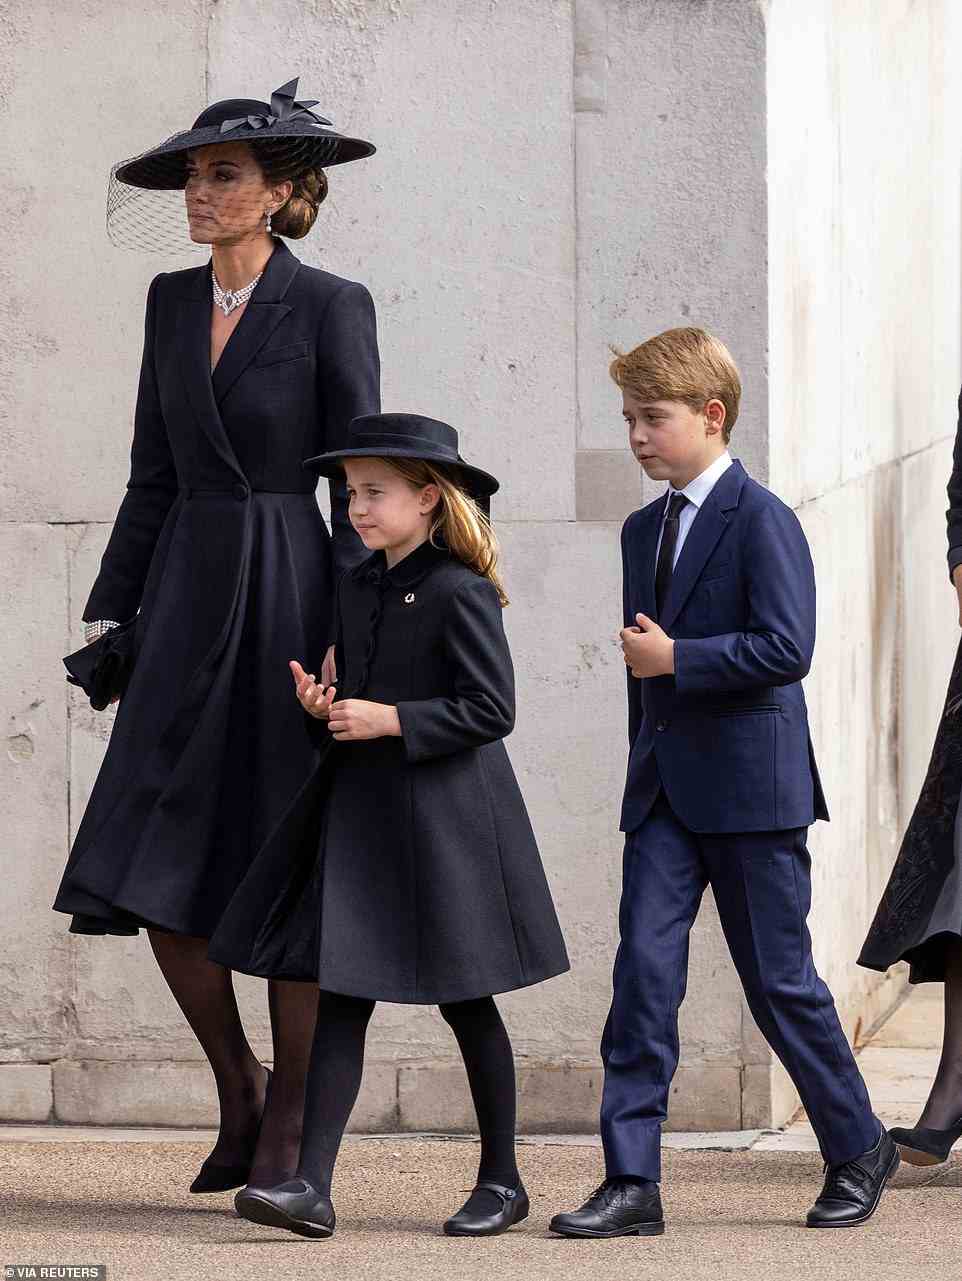 The Princess of Wales with her children Prince George and Princess Charlotte following the funeral service at Westminster Abbey